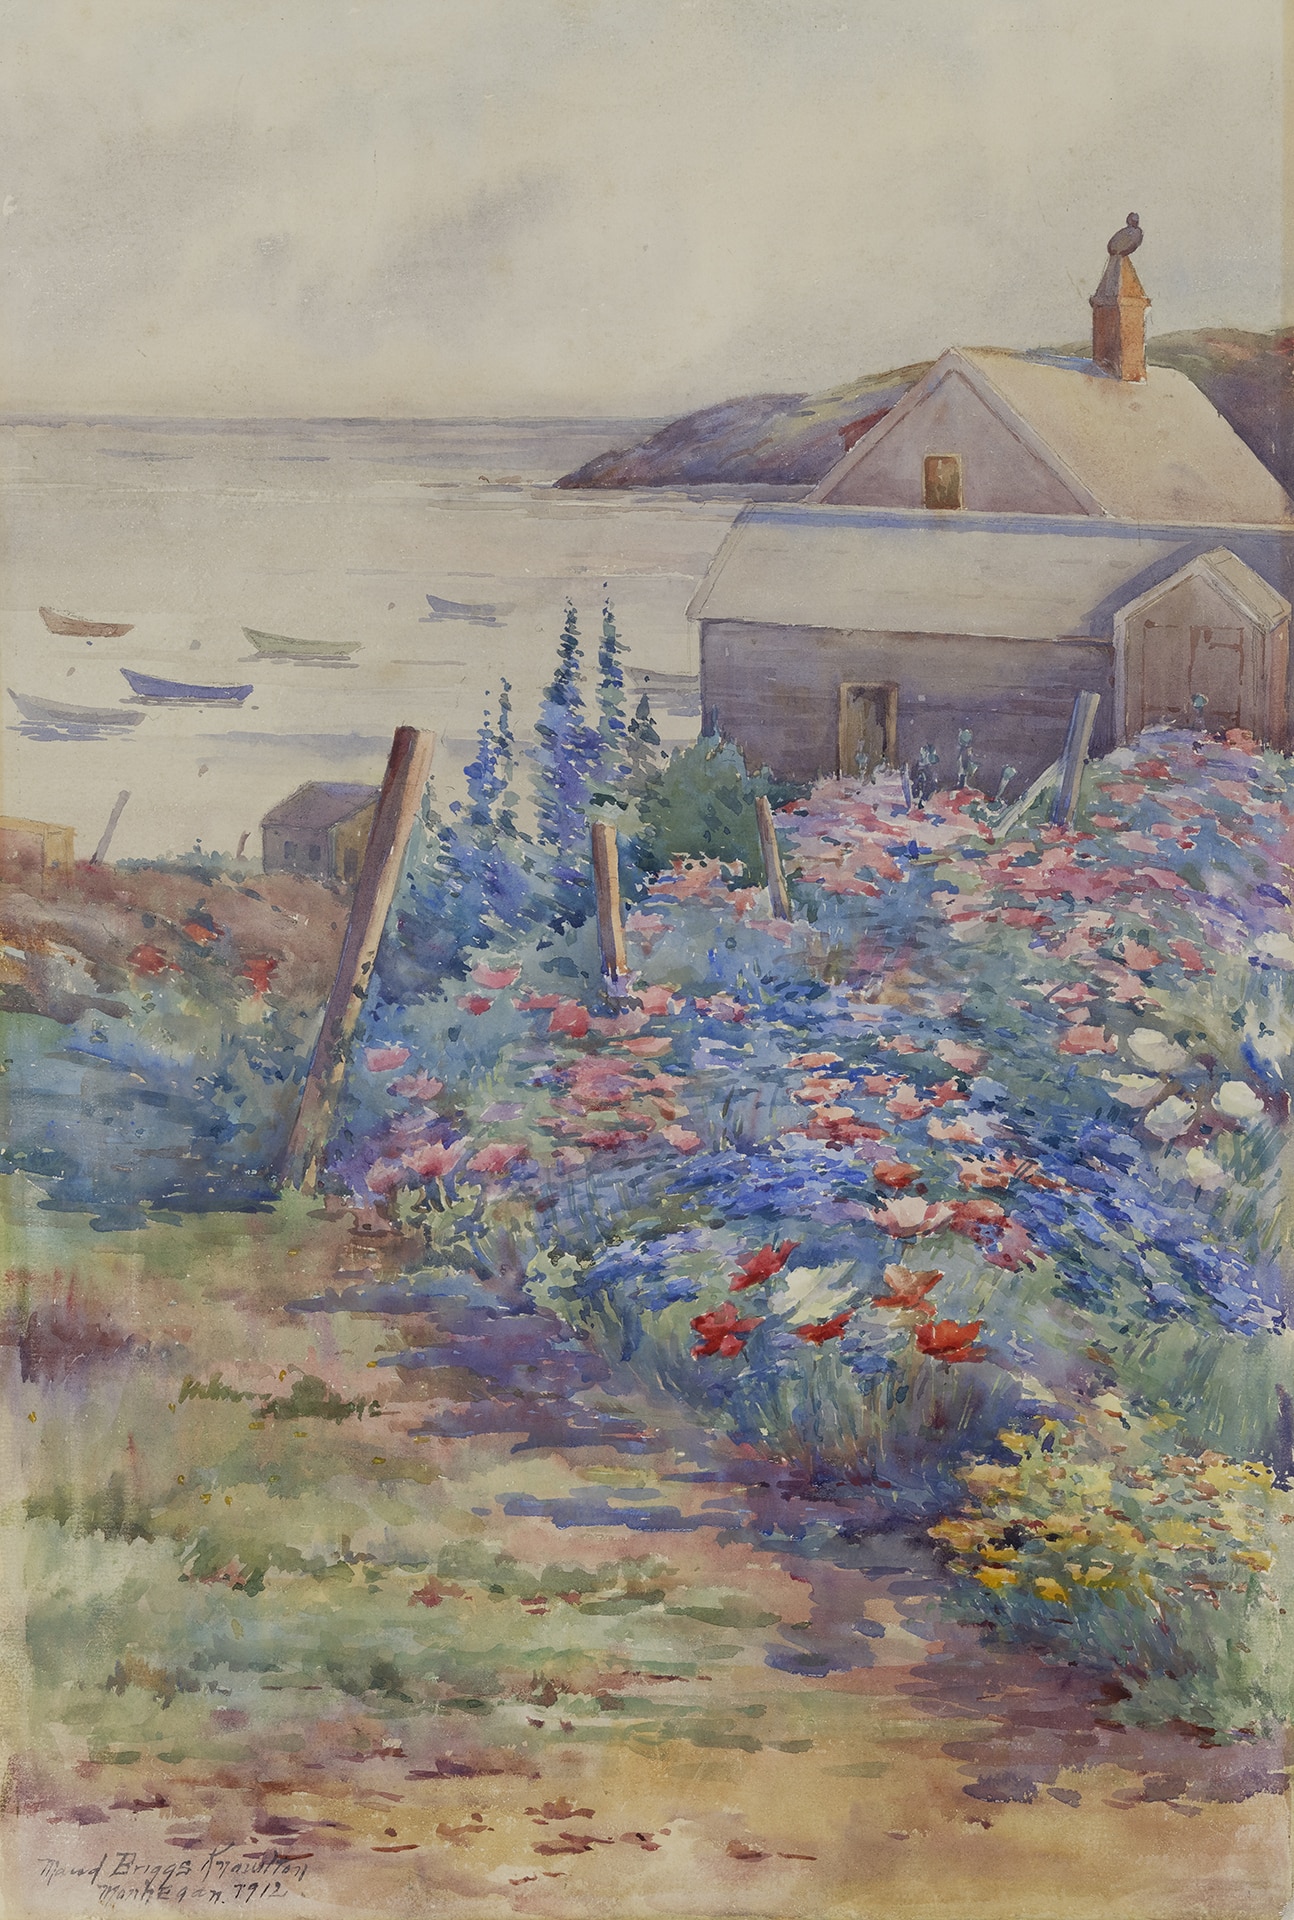 watercolor painting of a seaside house with blue flowers in the foreground